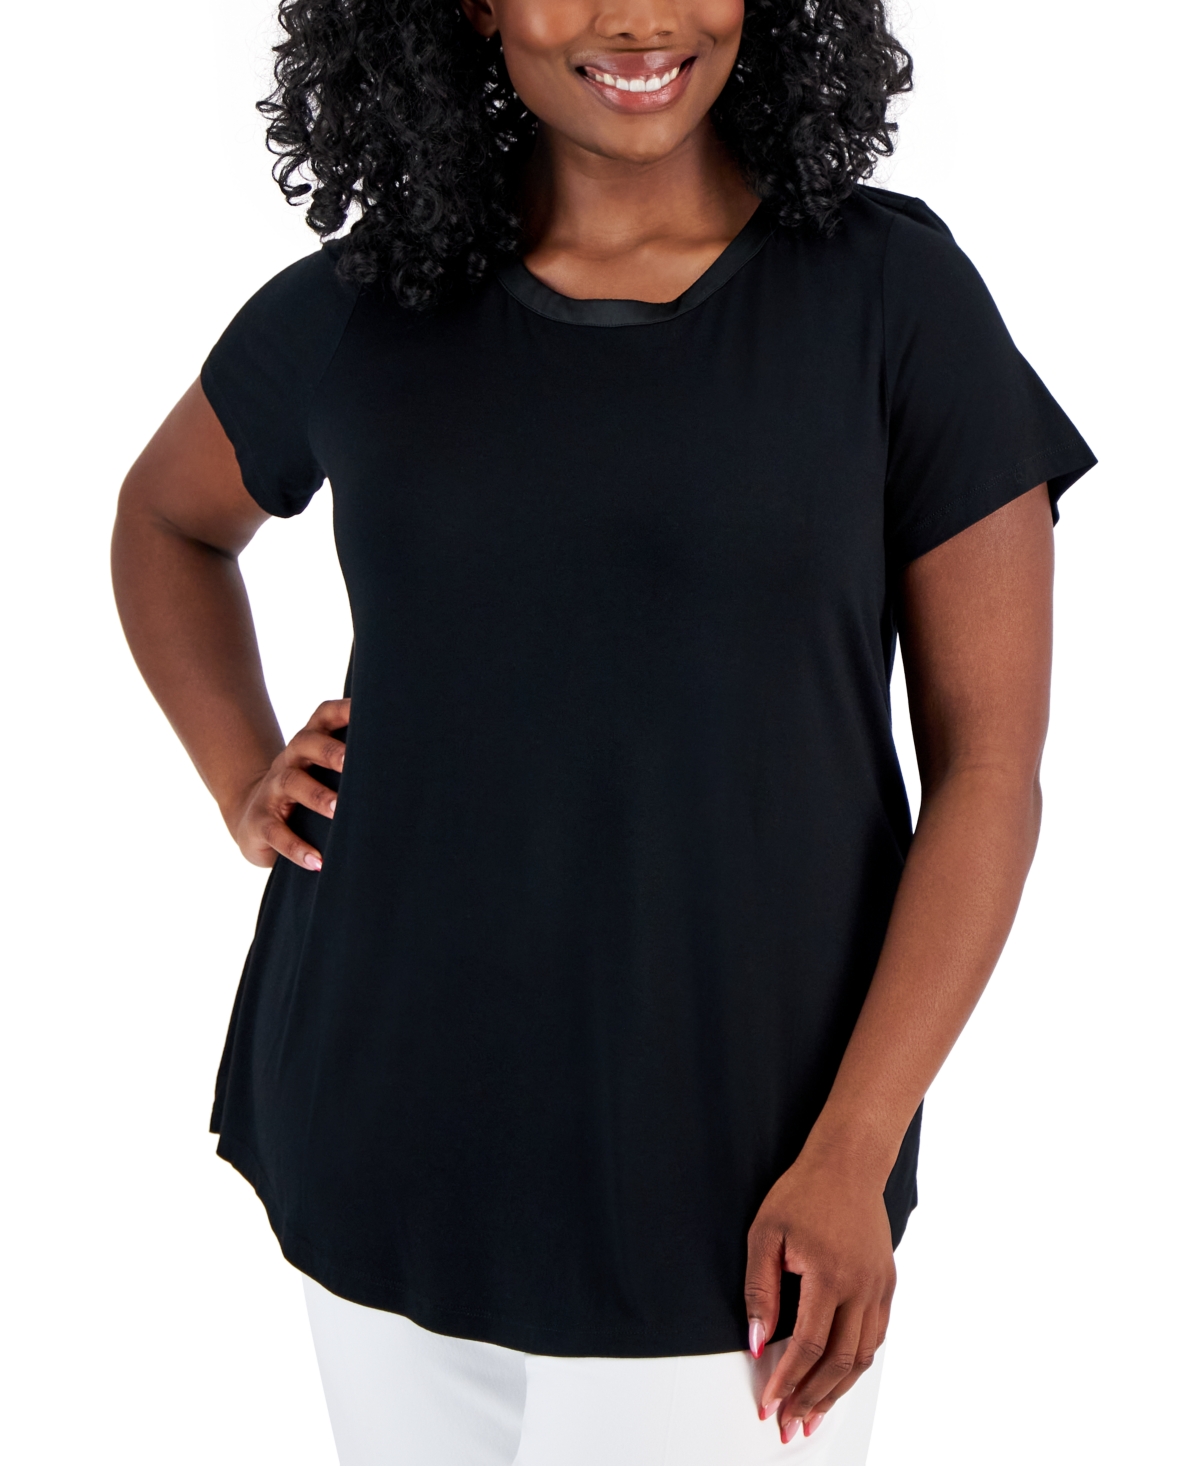 Plus Size Satin Trim Neck Short-Sleeve Top, Created for Macy's - Claret Rose